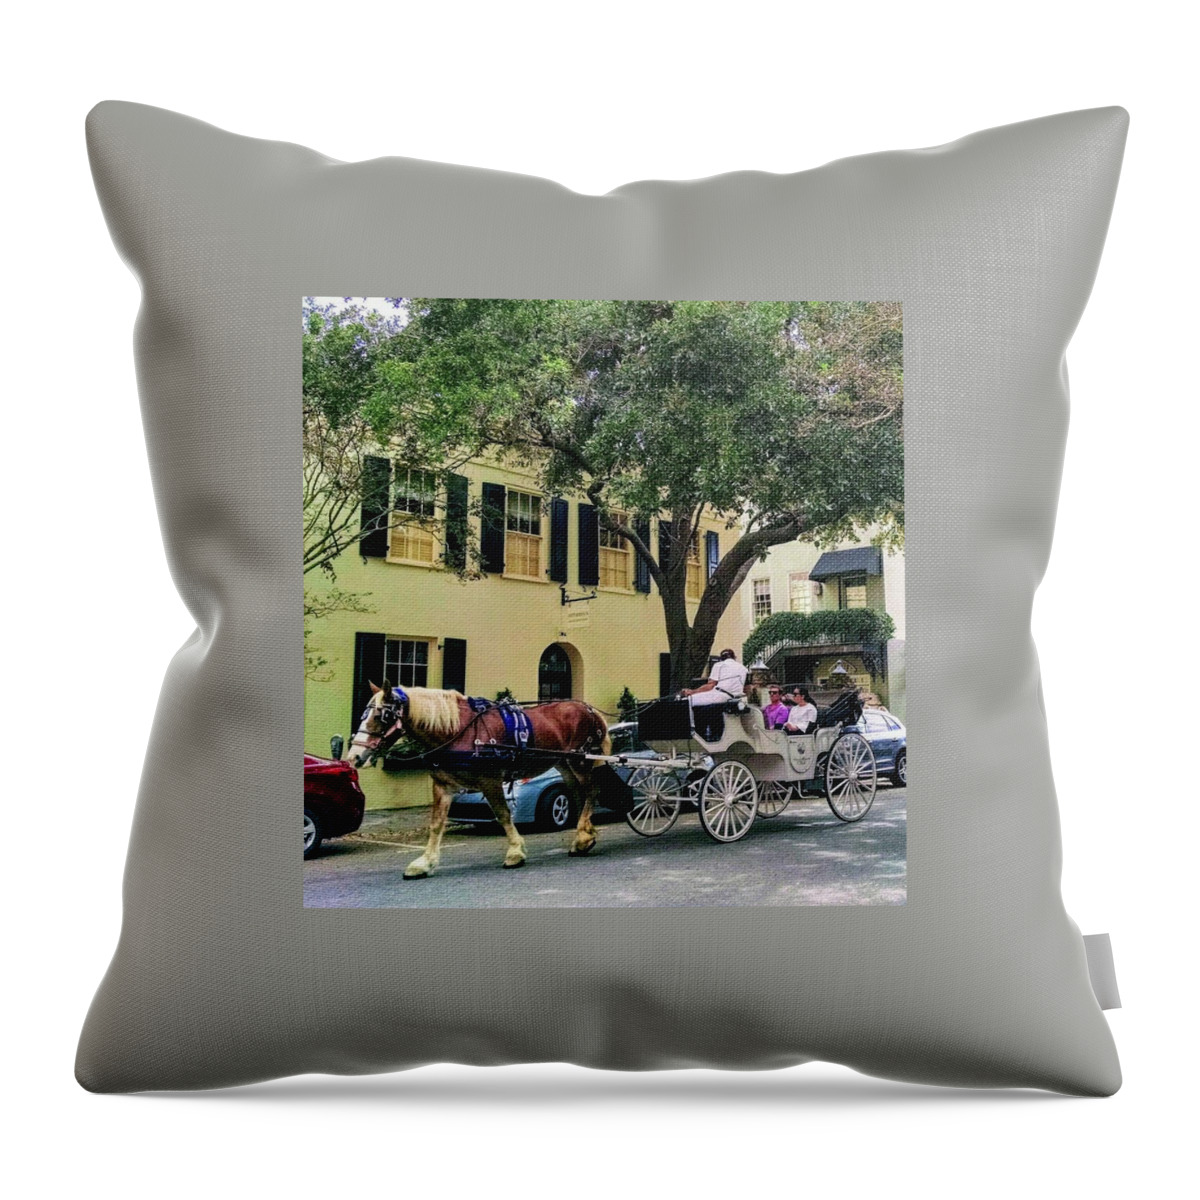 Horse Throw Pillow featuring the photograph Horse Stories by Sherry Kuhlkin